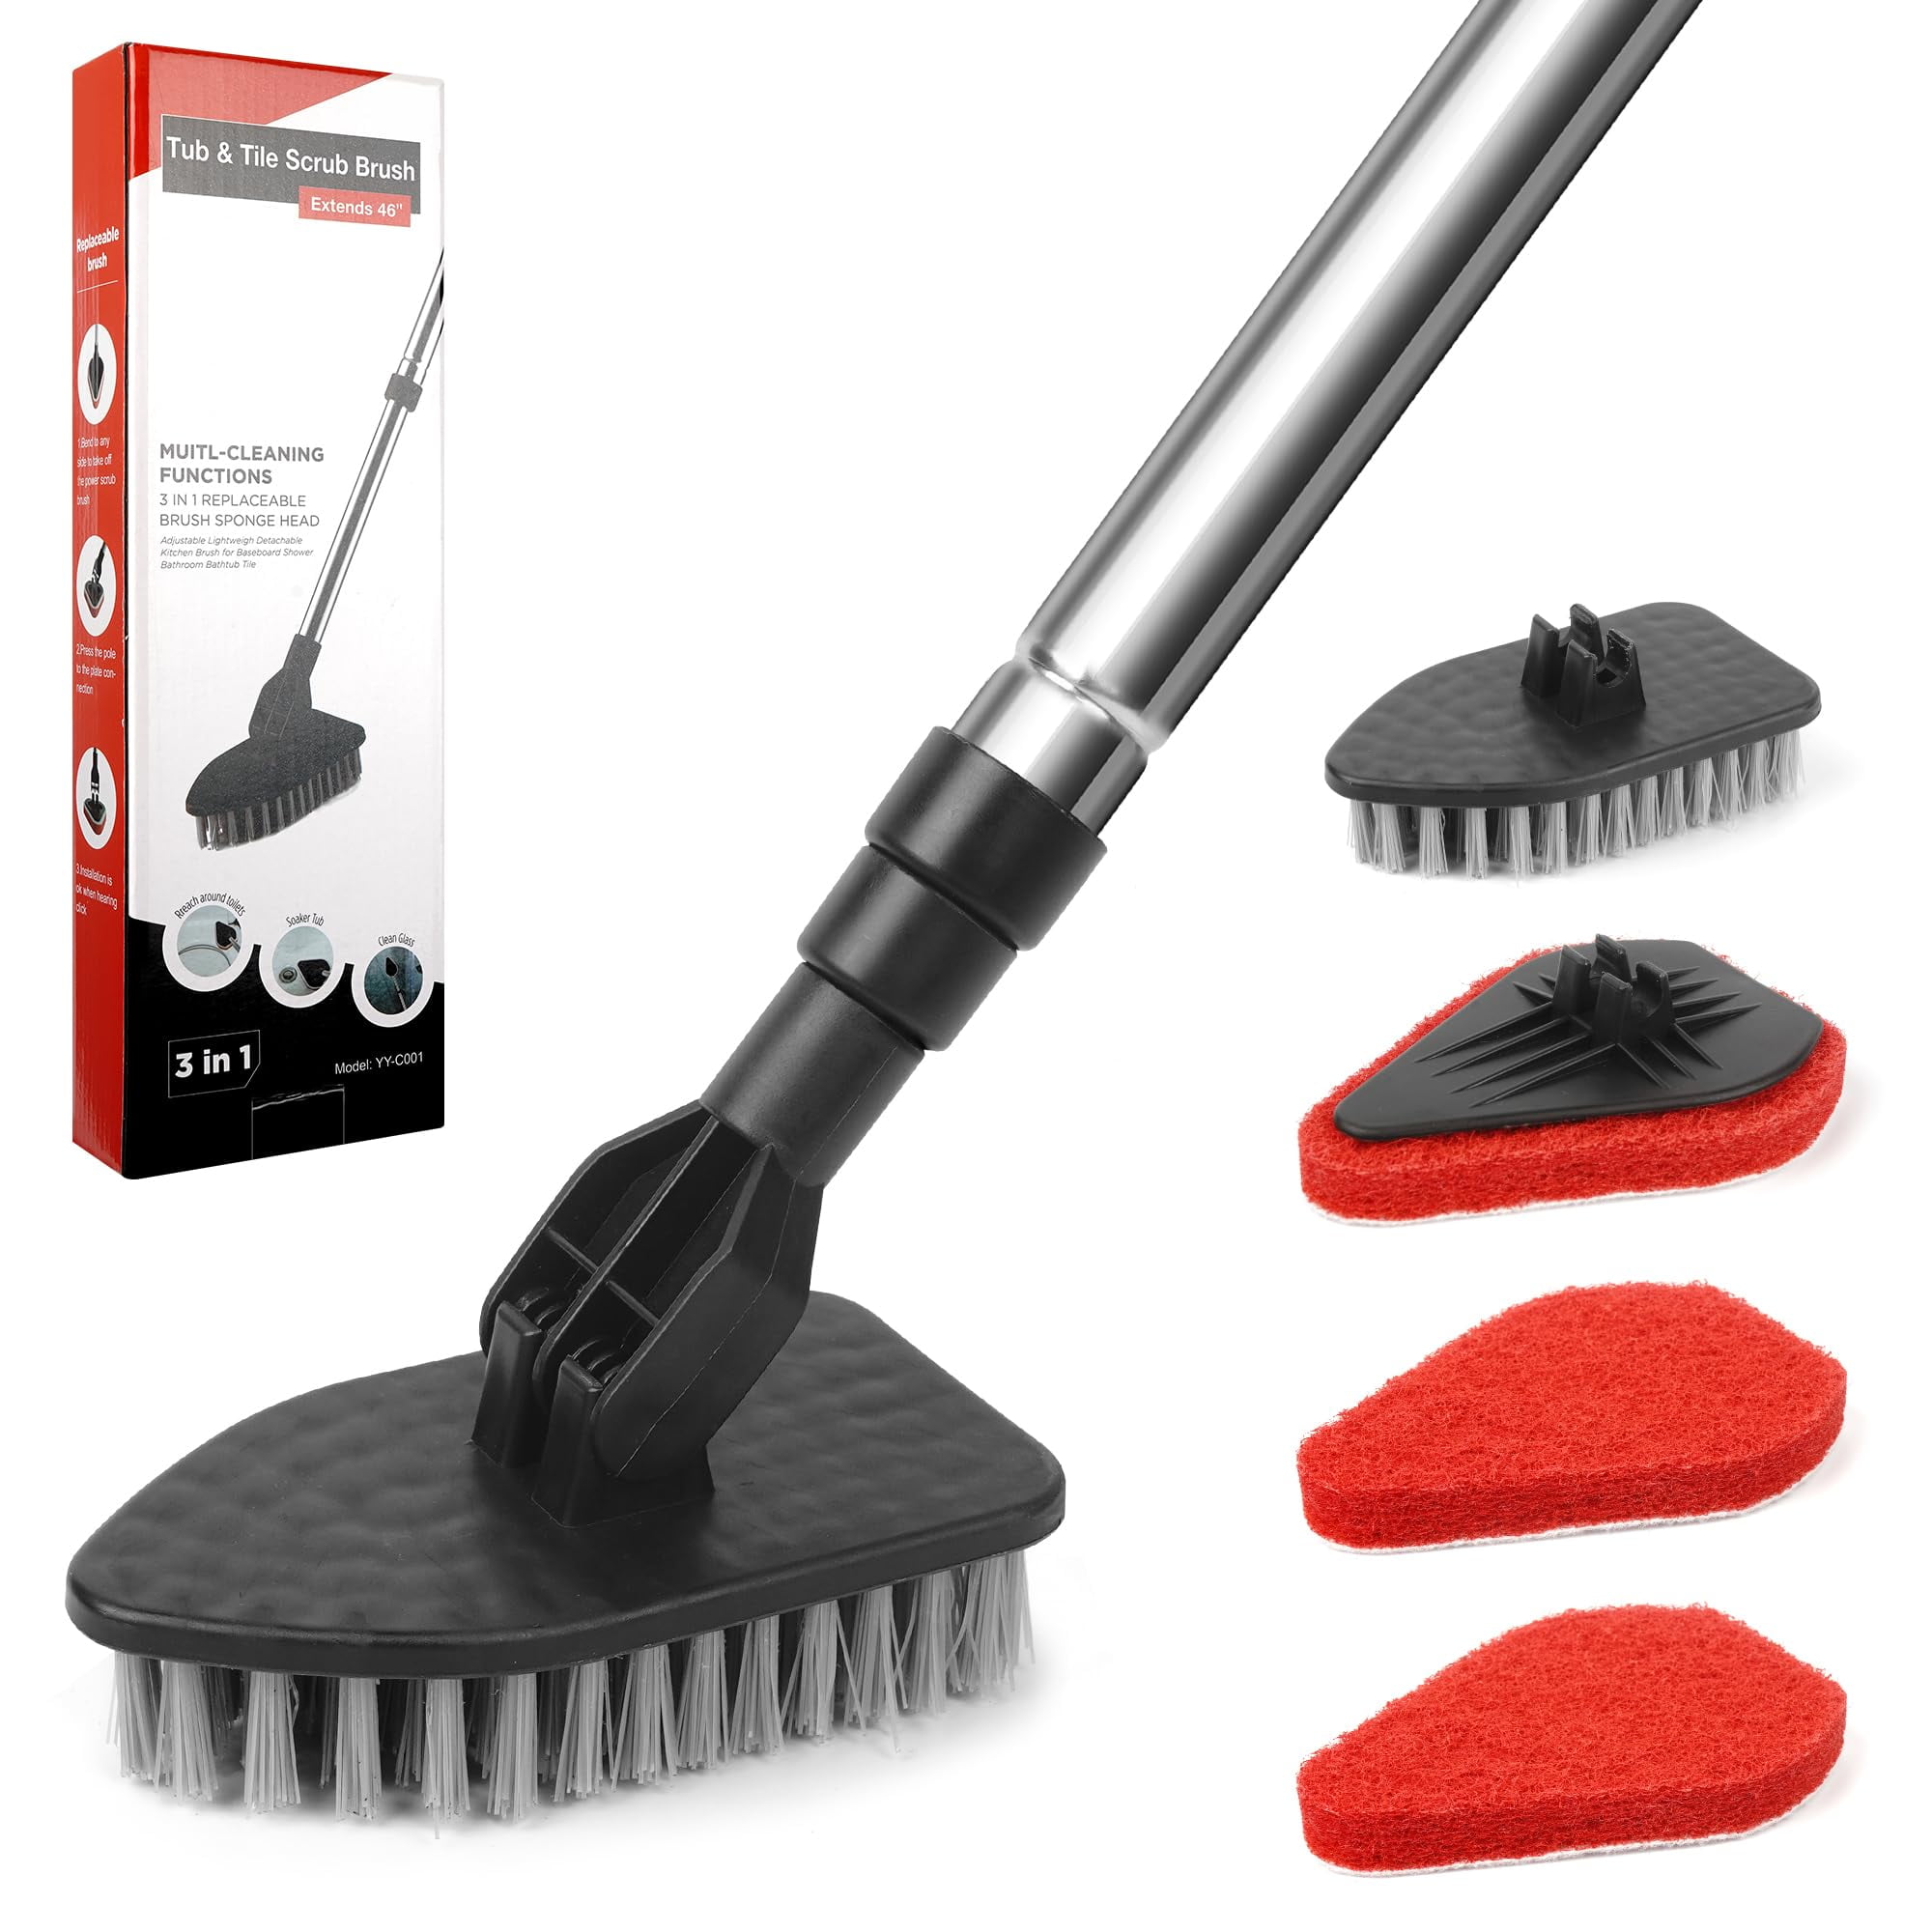 Yoribo 2 in 1 Cleaning Brush Tub and Tile Scrubber Brush Sponge with 46 Extendable Long Lightweight Handle Detachable Stiff Bristles SC